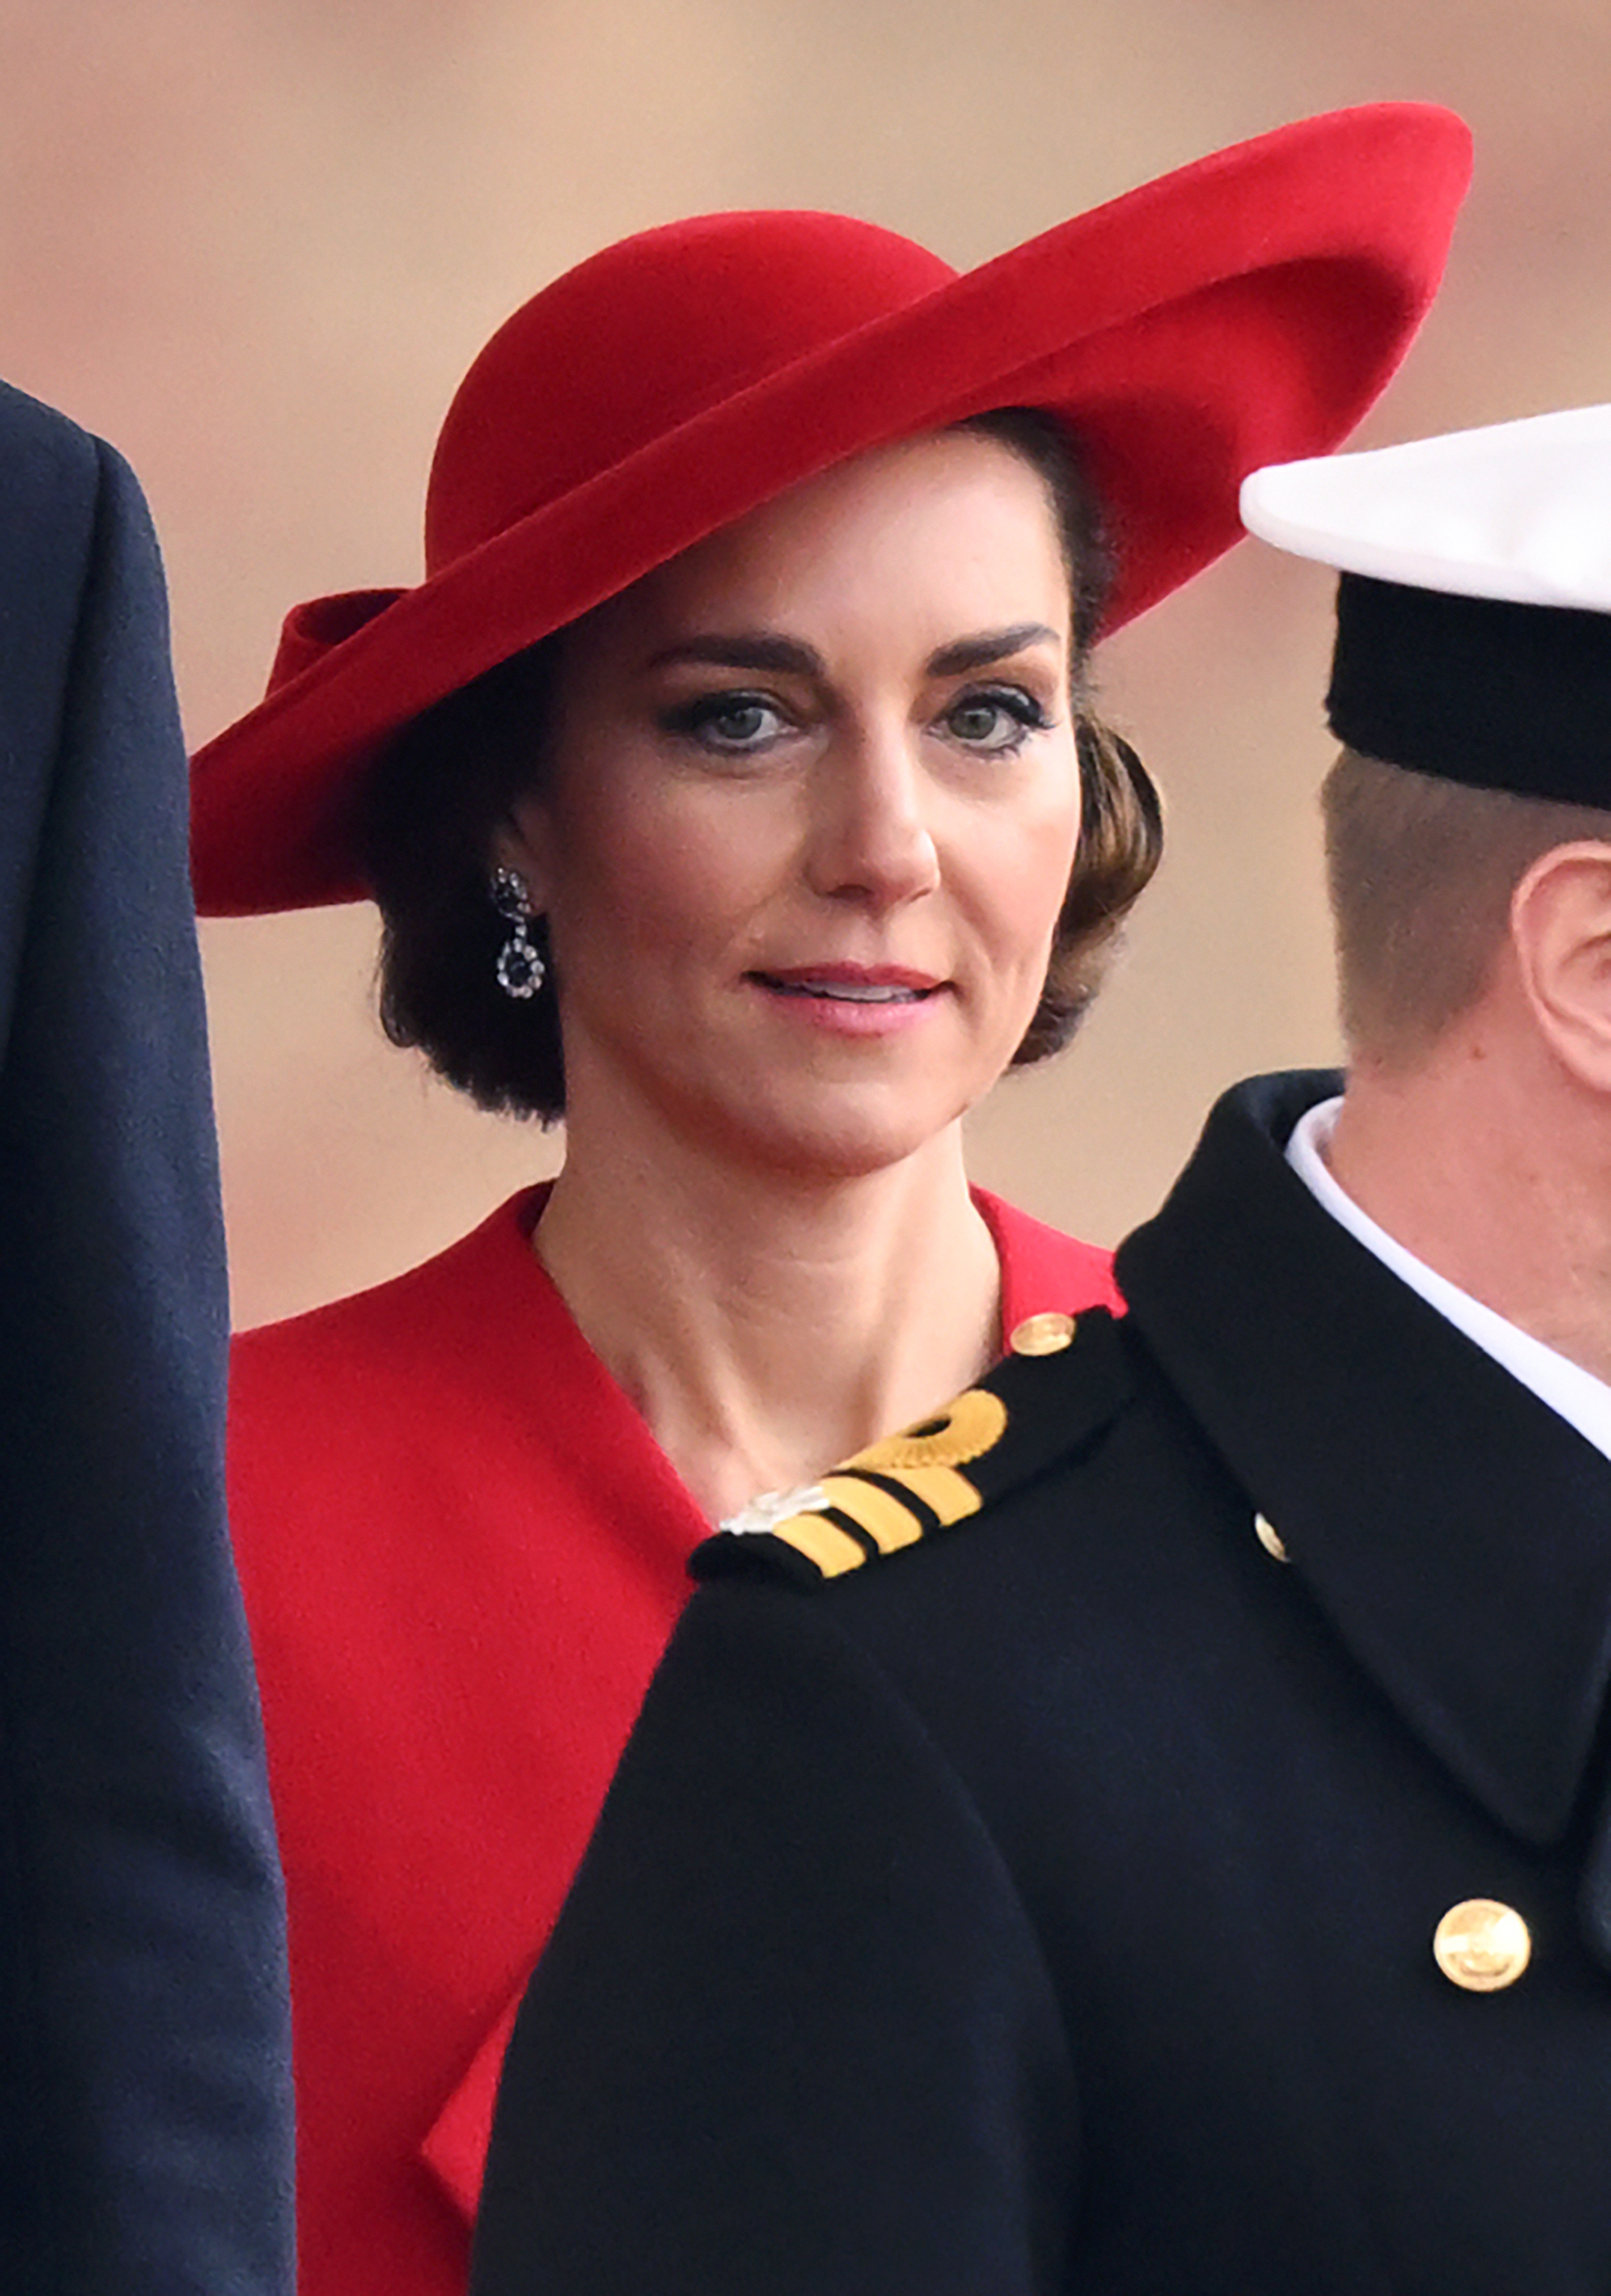 Kate in a red dress and matching hat, with drop earrings, at a formal event